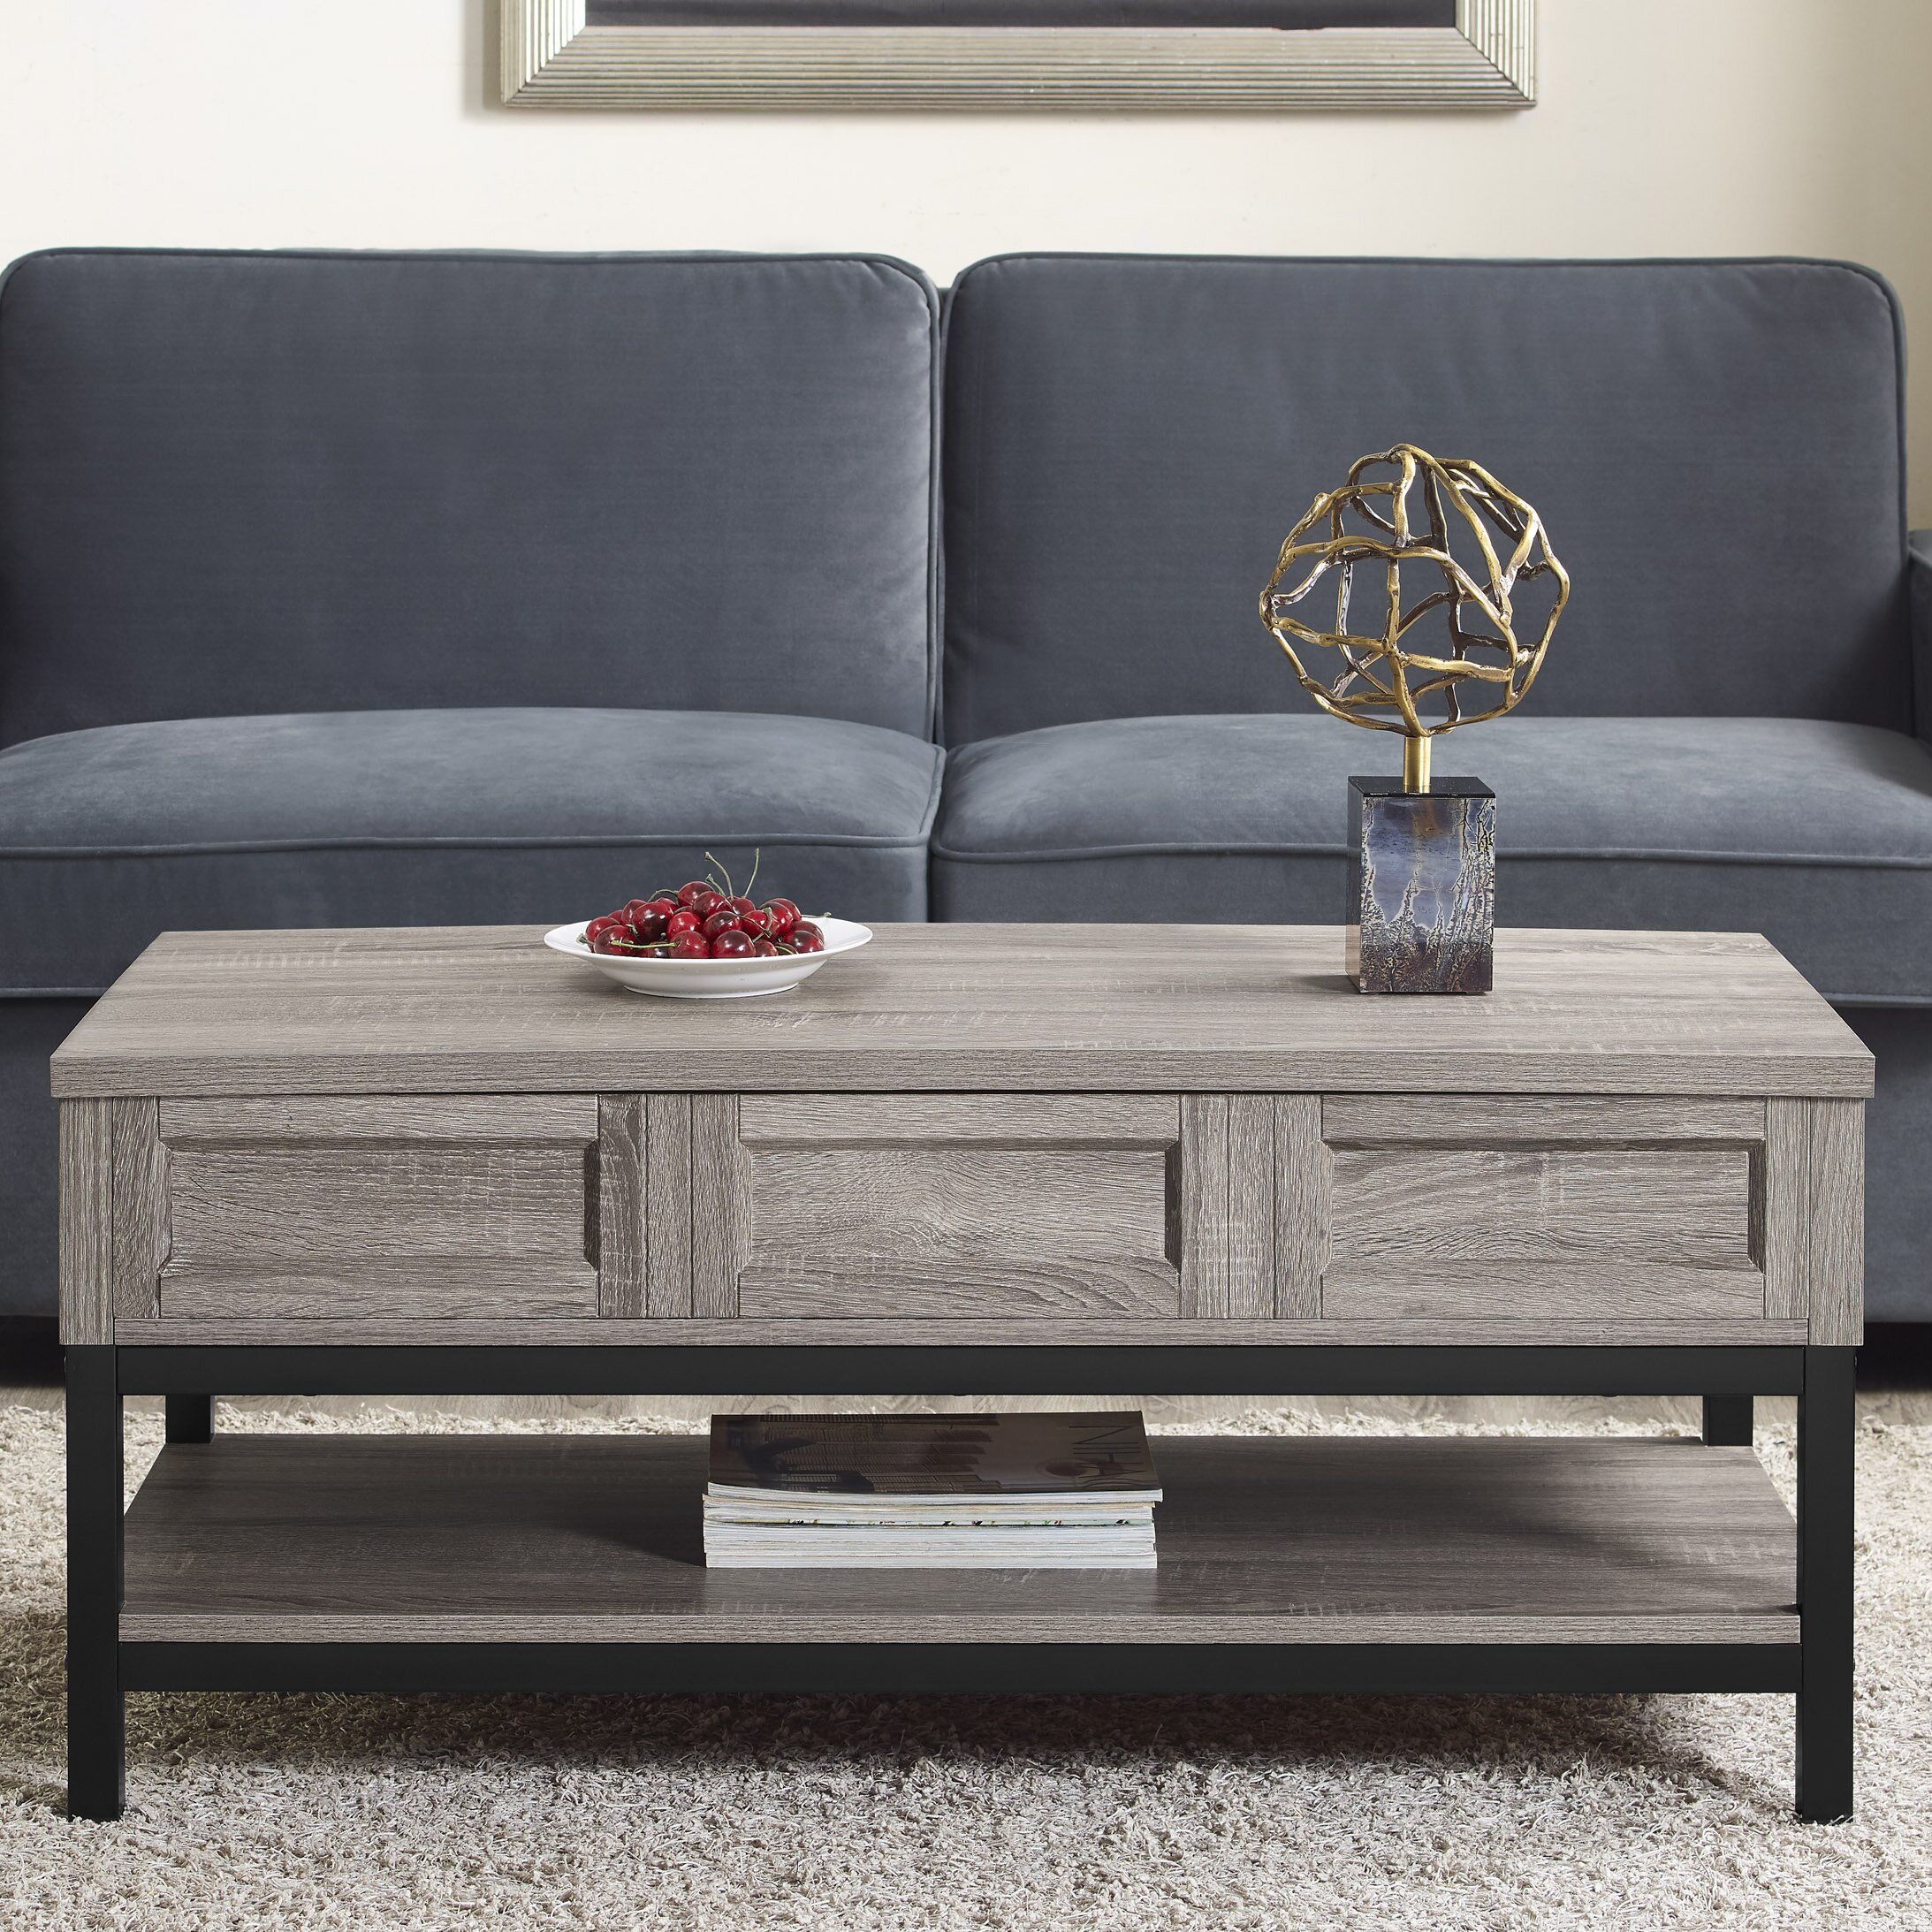 Laurel Foundry Modern Farmhouse Omar Coffee Table With Lift Top Throughout Modern Farmhouse Coffee Tables (View 12 of 20)